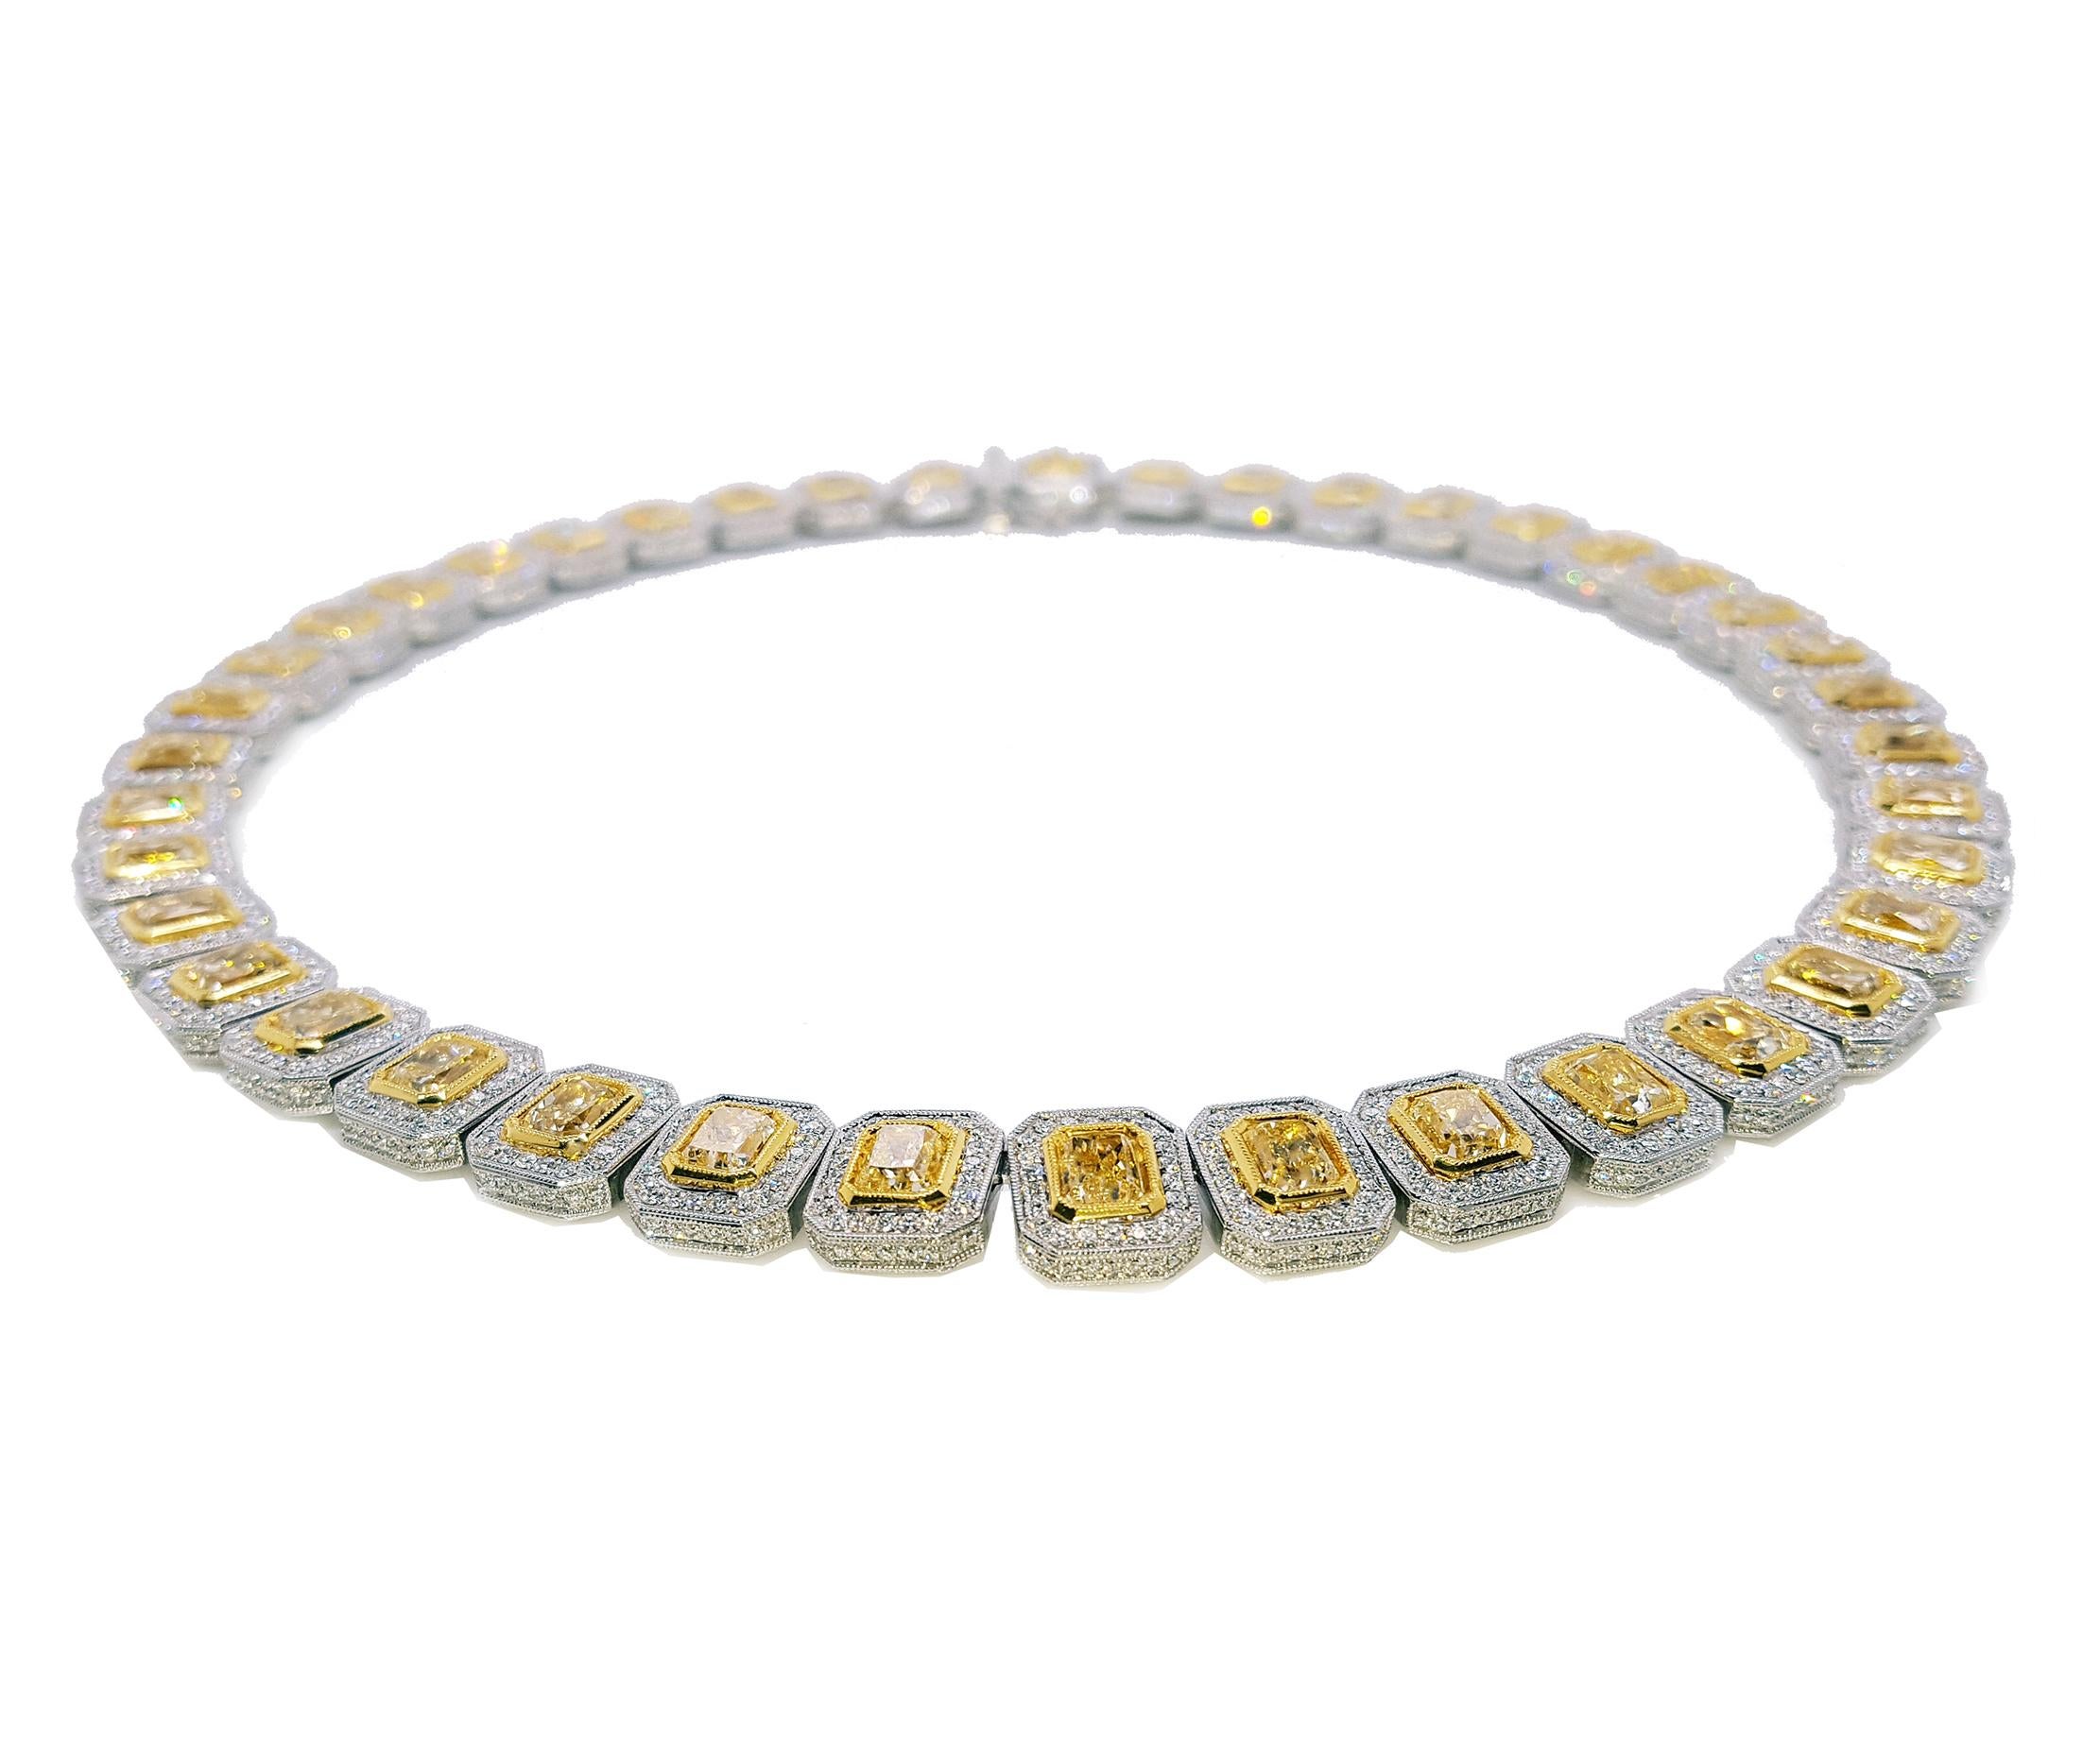 This luxurious elegant design diamond eternity necklace features just under 30 carat perfectly matched radiant cut yellow diamonds, each diamond is approximately 0.71 carat. encircled by a halo of 7.90 carat of round brilliant white diamond accents,